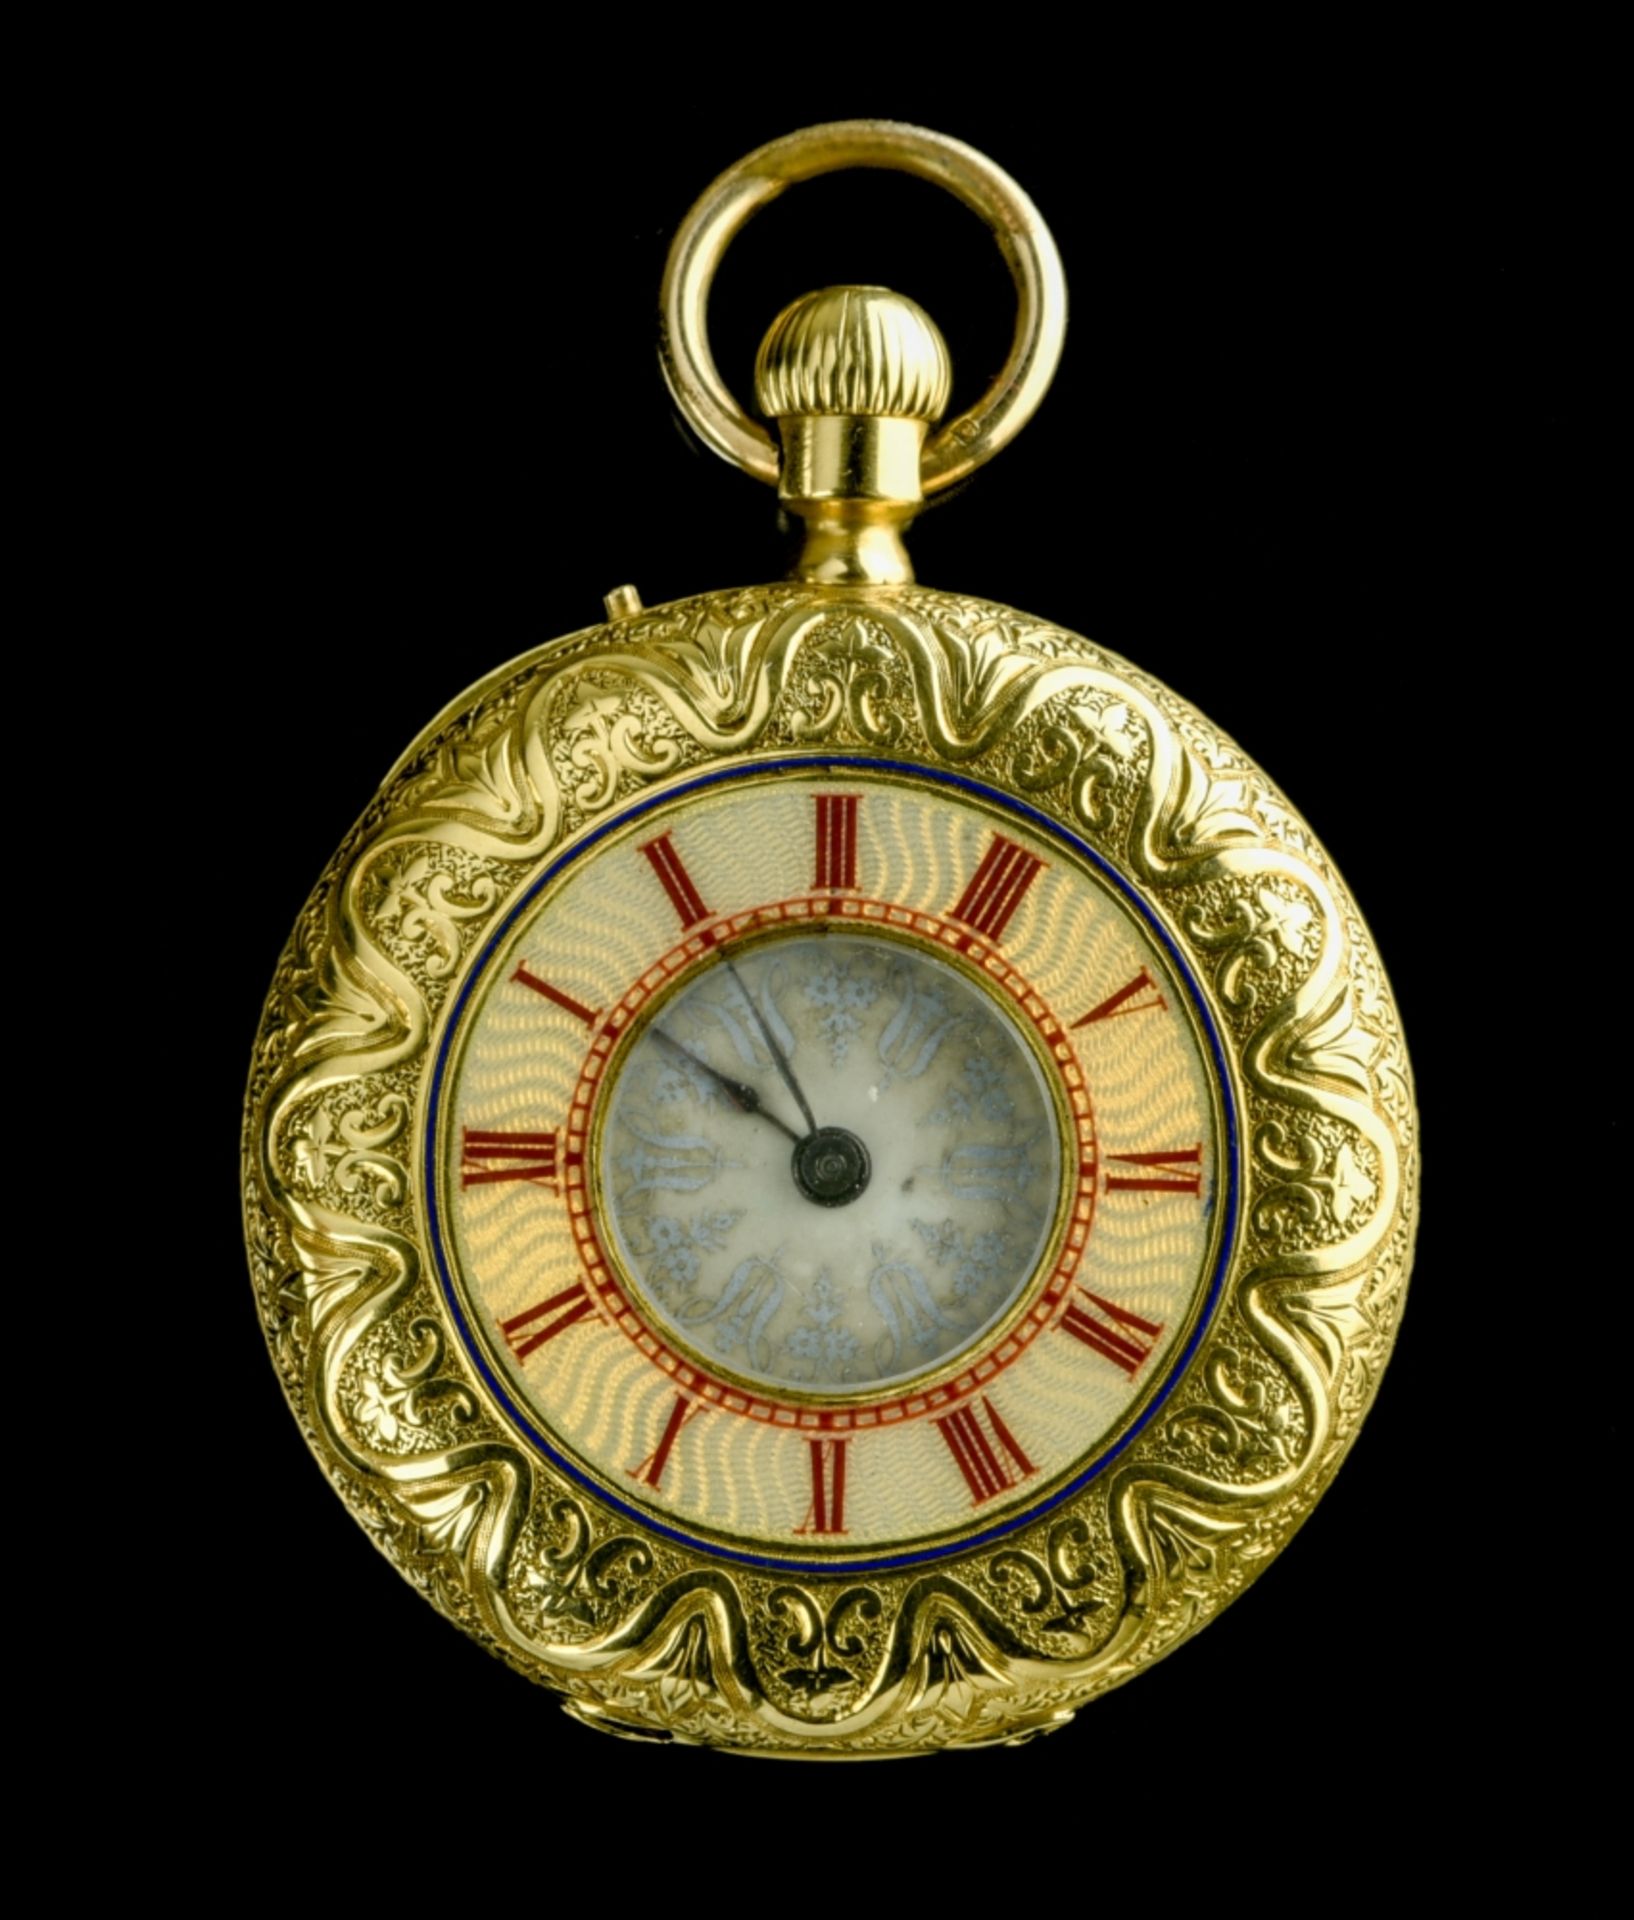 Yellow gold fob watch LATE 19TH CENTURY 18 kt yellow gold fob watch. "Half hunter" casing covered in